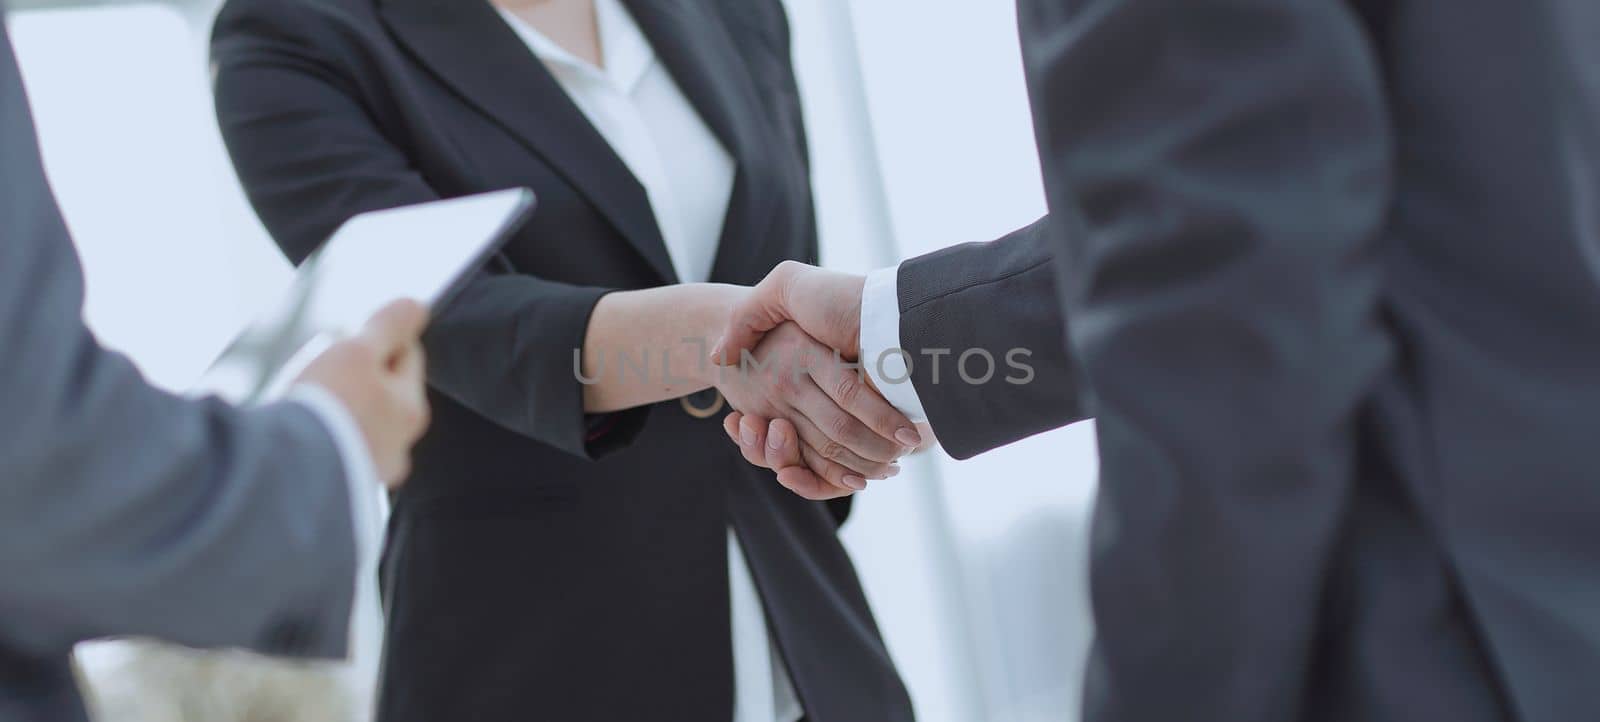 Businesswoman shaking hands with a businssman during a meeting.concept of partnership